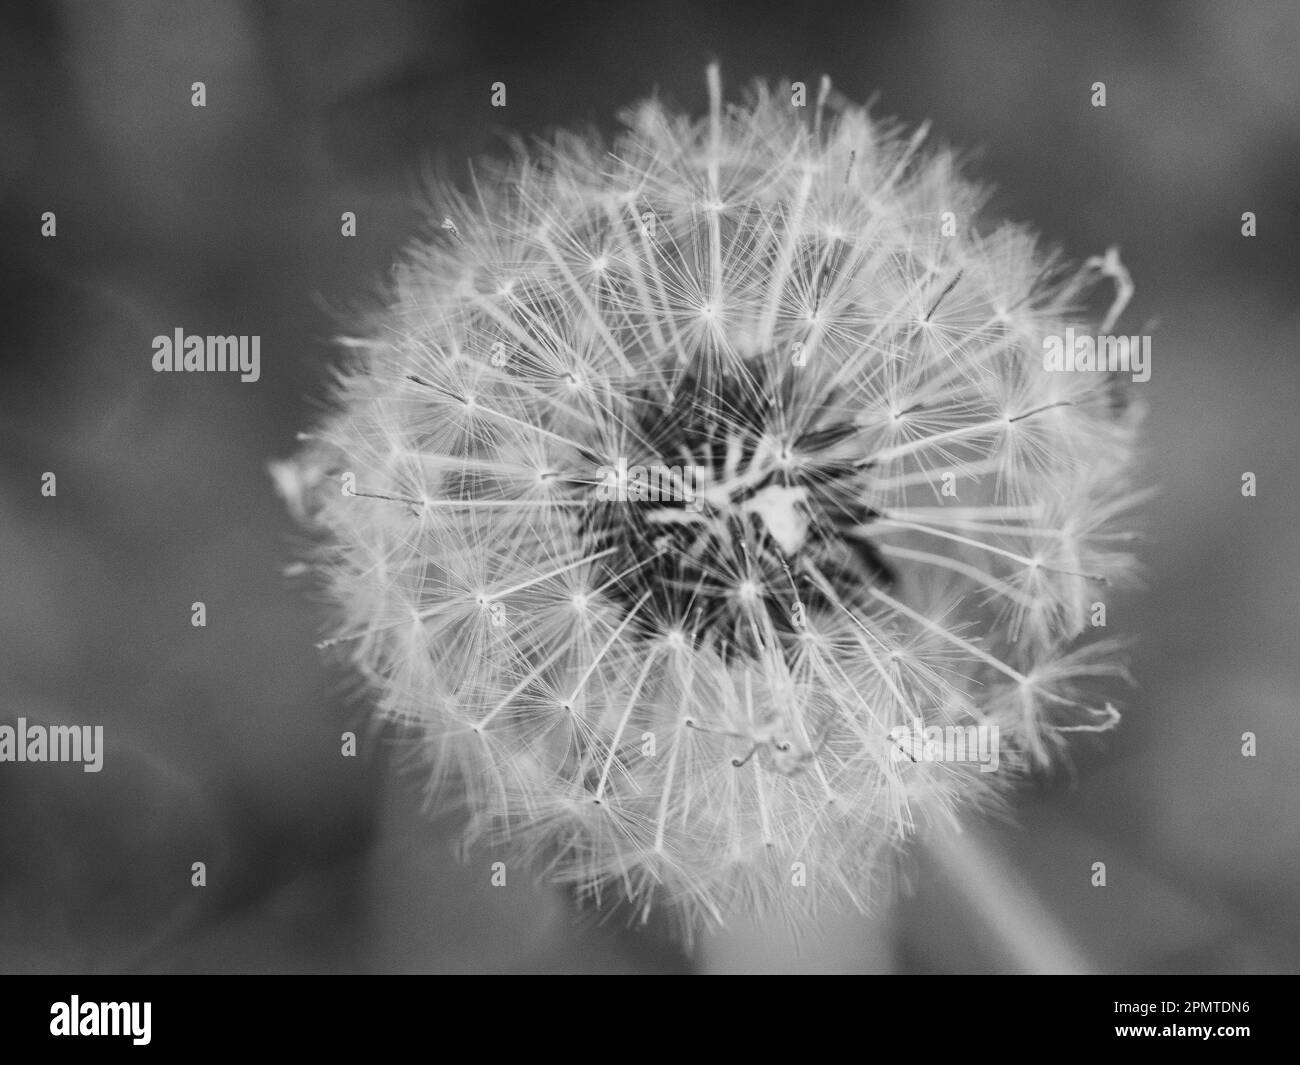 Dandelion gone to seed, fluffy white pappus with seeds attached Stock Photo